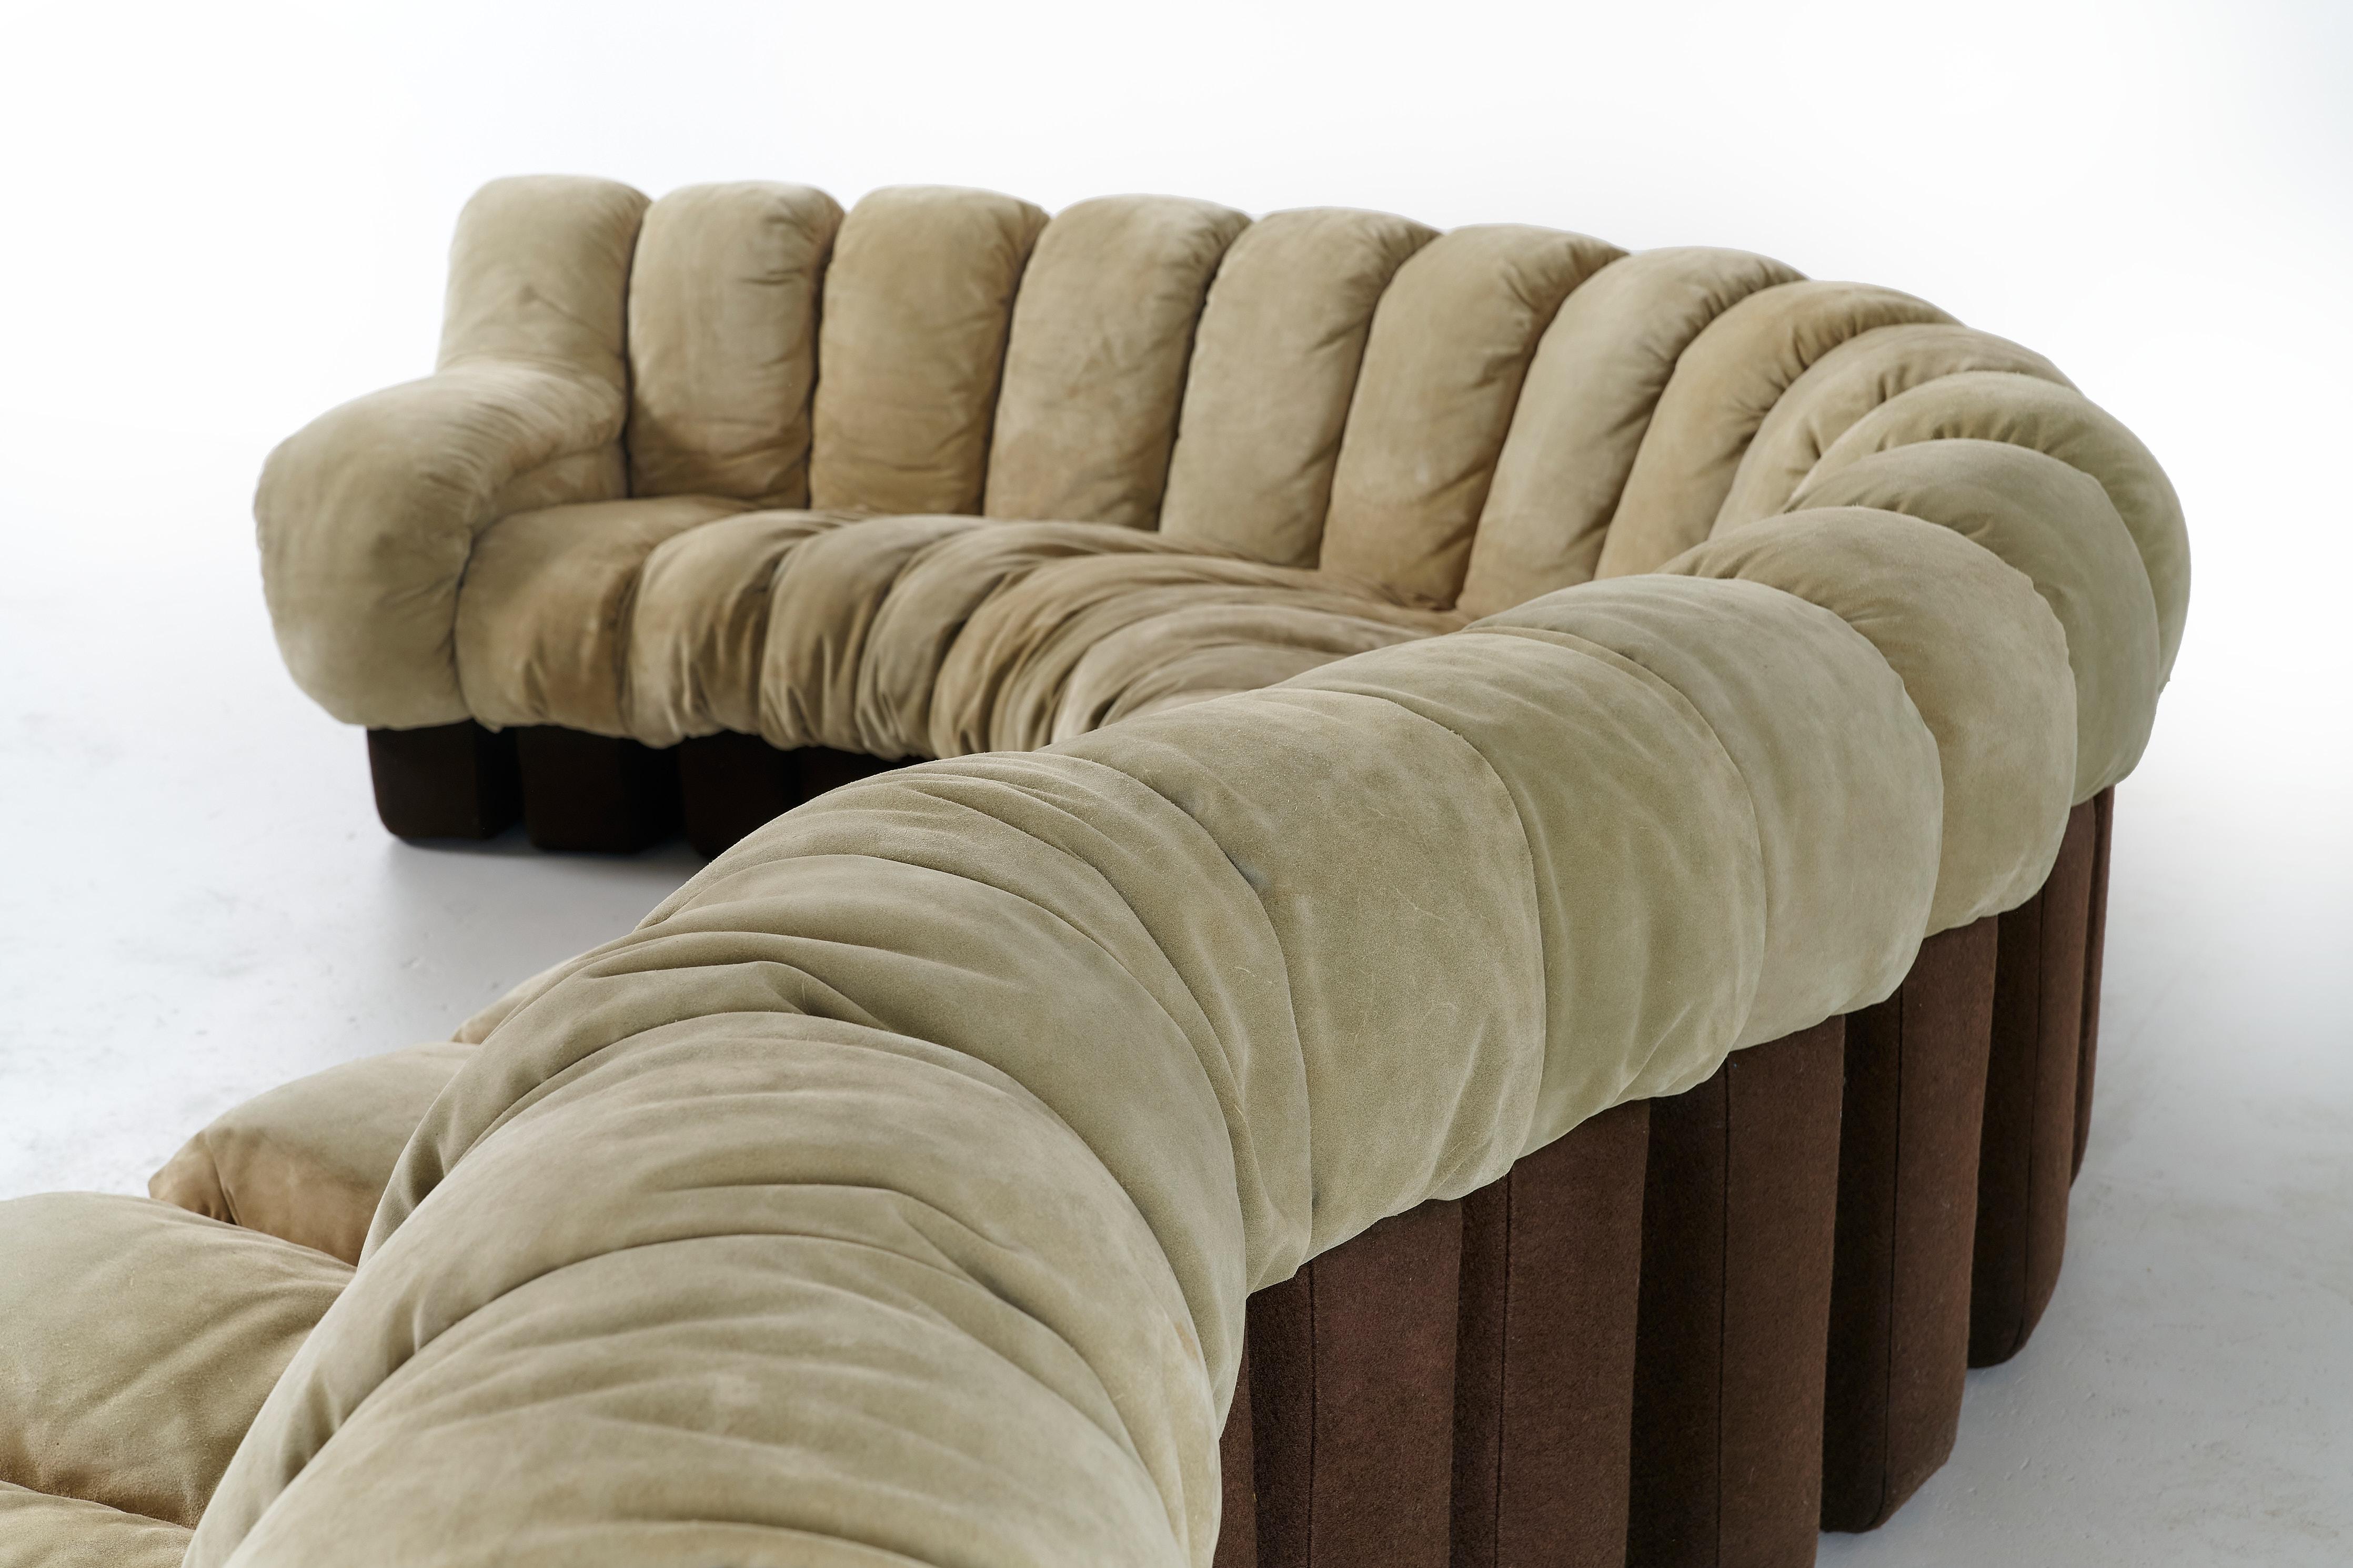 Suede DS600 Modular Non Stop Sofa by Ueli Berger for De Sede. Set of 22 Pieces For Sale